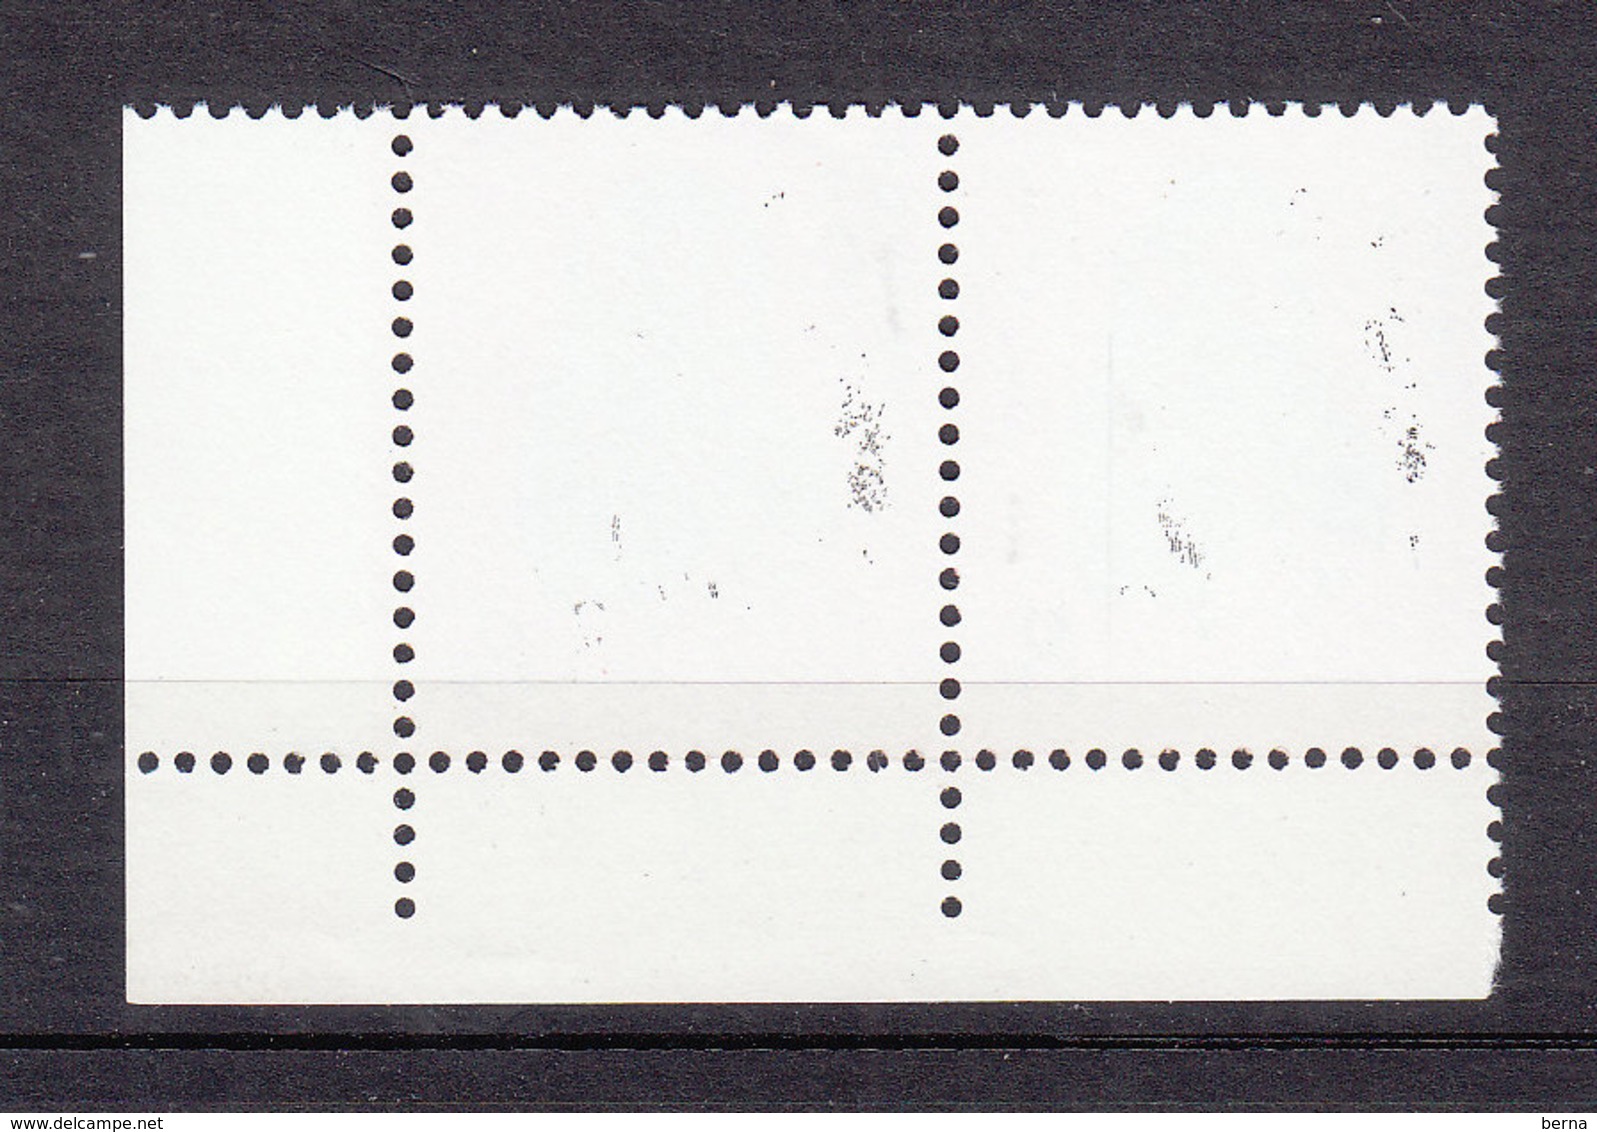 CHINA MONKEY SG 2968 PAIR CORNER SHEET NEW YEAR 1980 MNH -LIGHT BLACK MARKS AT REVERSE AS USUAL. READ SELLING CONDITIONS - Nuovi